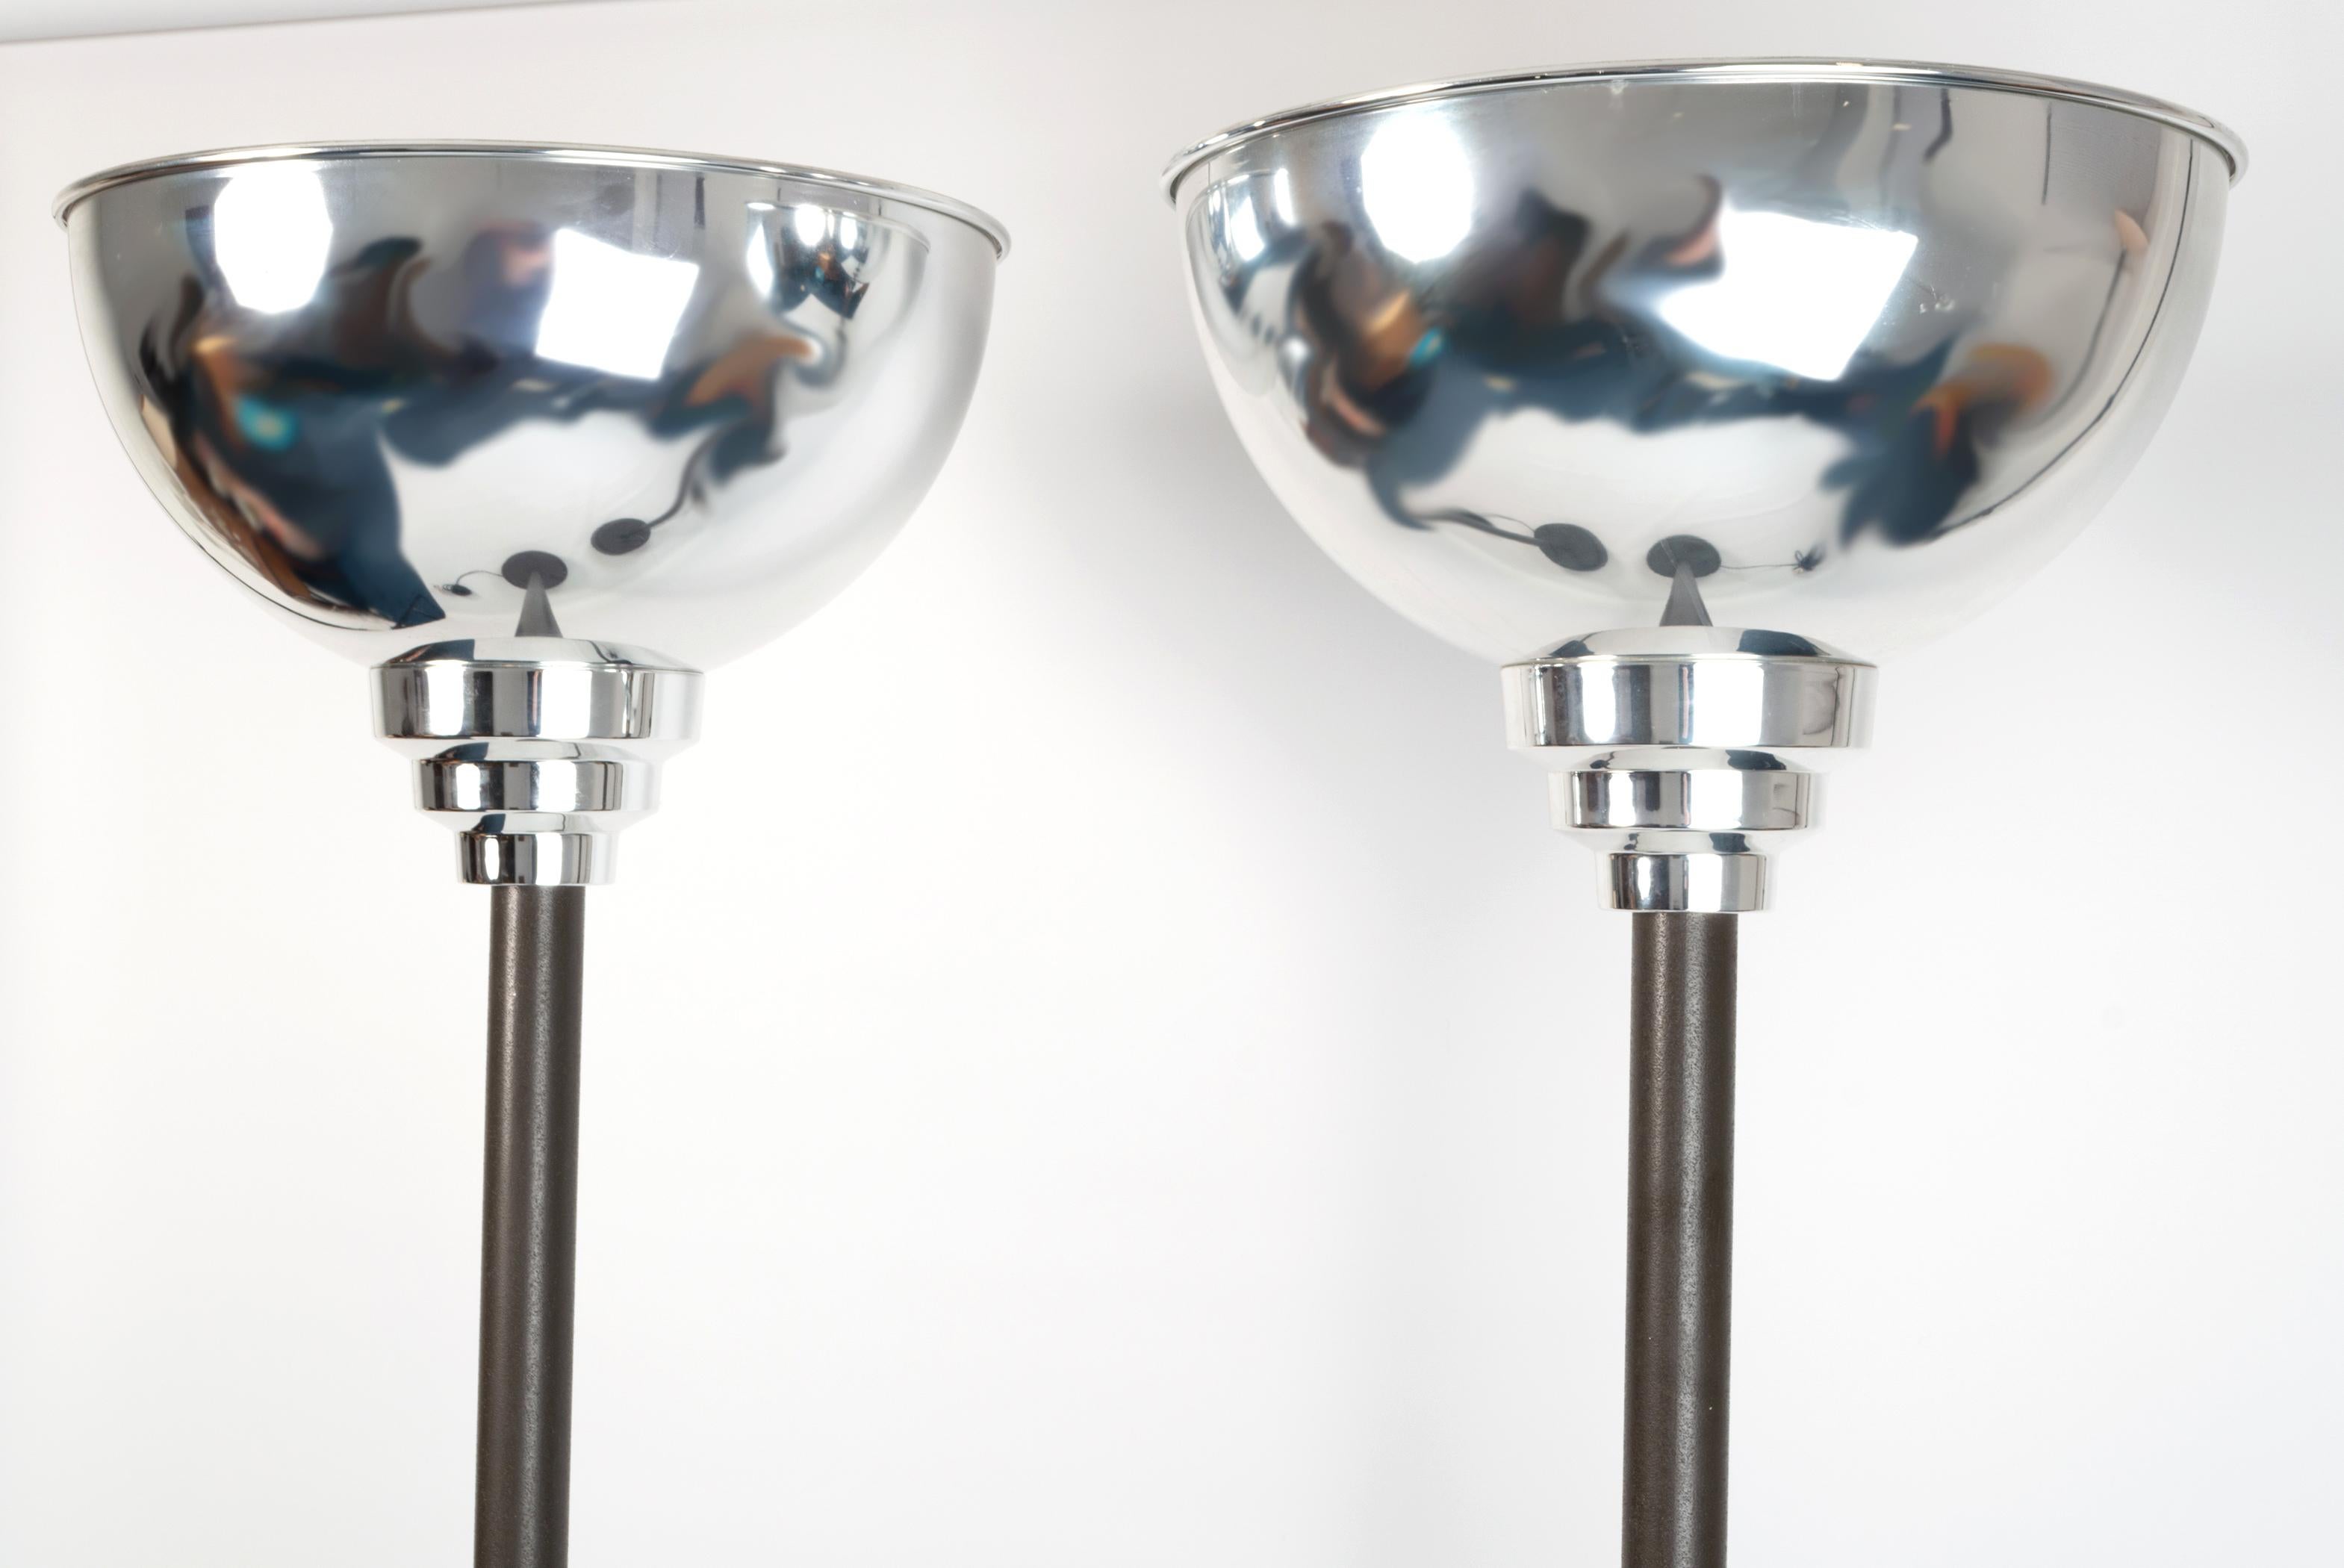 Pair Of English Art Deco chrome tall uplighter floor lamps by Thorn Electrical Industries, England. C.1930 (later to be acquired by the Austrian company, Zumtobel)

Classic Art Deco Odeon Design.
Dramatic proportions. A fantastic example.